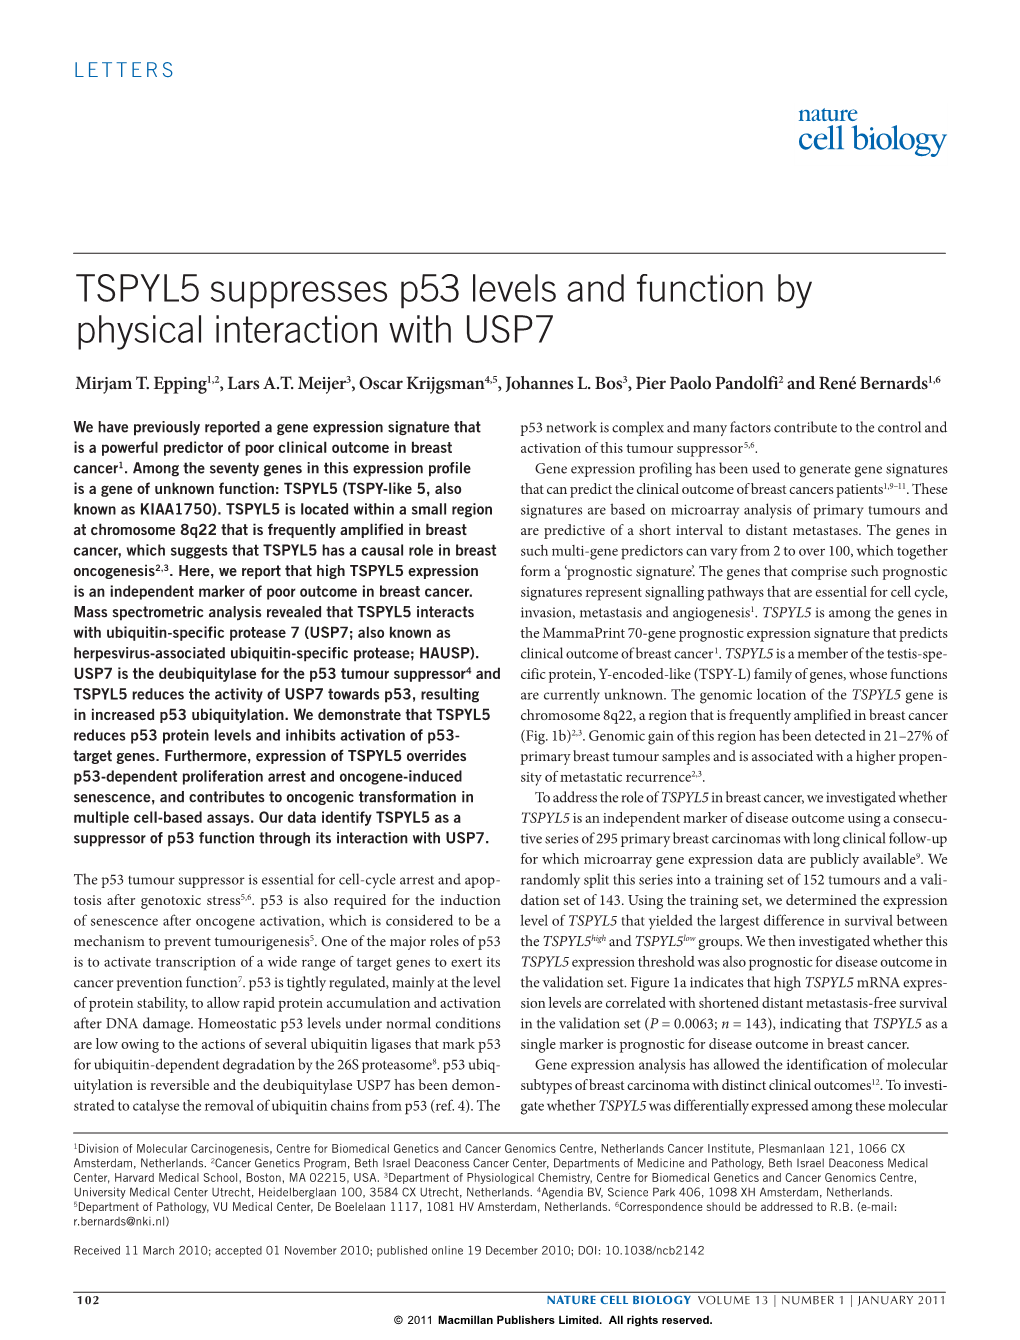 TSPYL5 Suppresses P53 Levels and Function by Physical Interaction with USP7